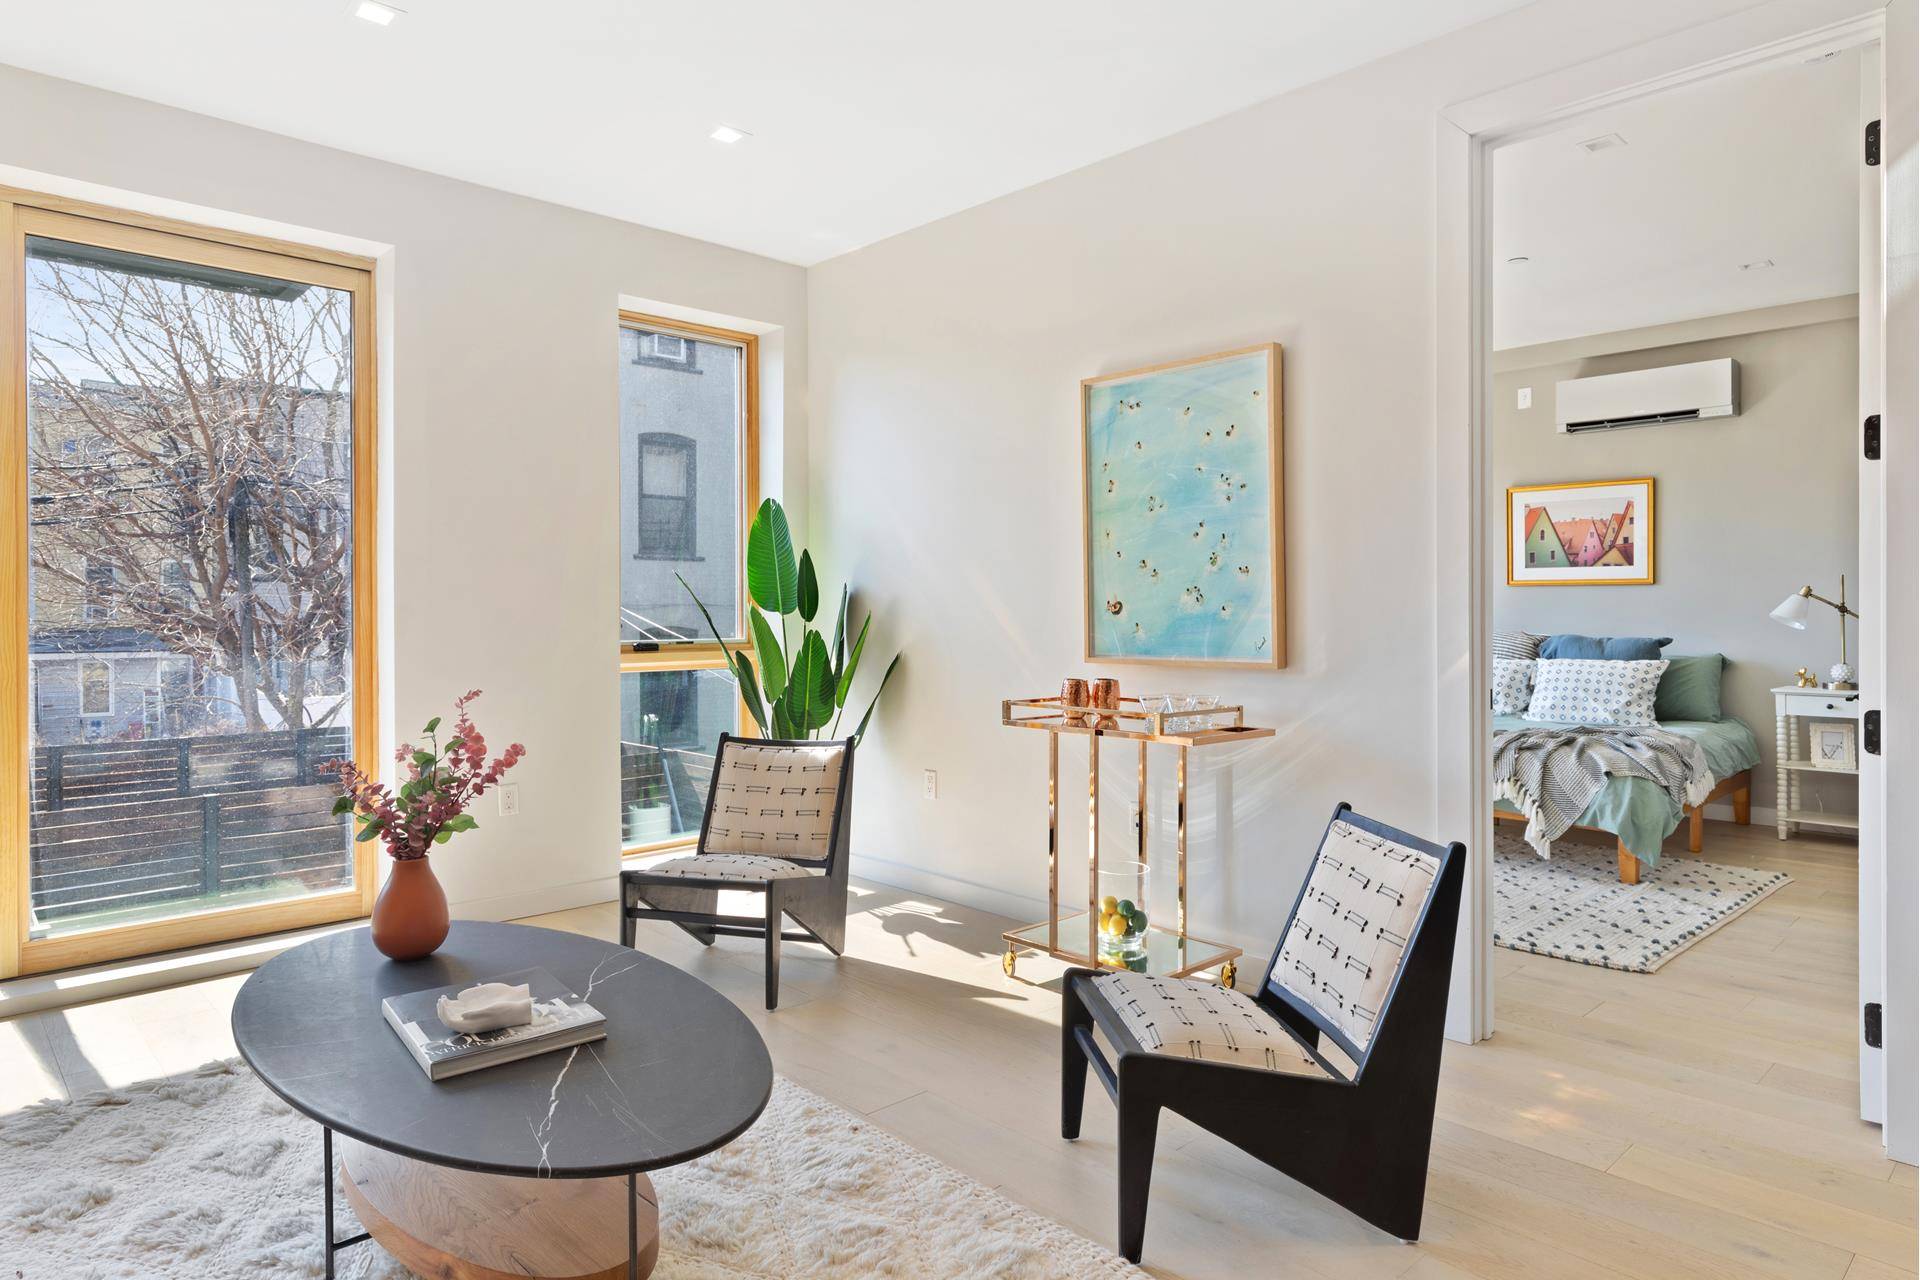 952 Bushwick Avenue is Bushwick's newly constructed premier boutique elevator condominium, offering a thoughtfully composed collection of 10 graciously scaled two bedroom, three bedroom and duplex residences.